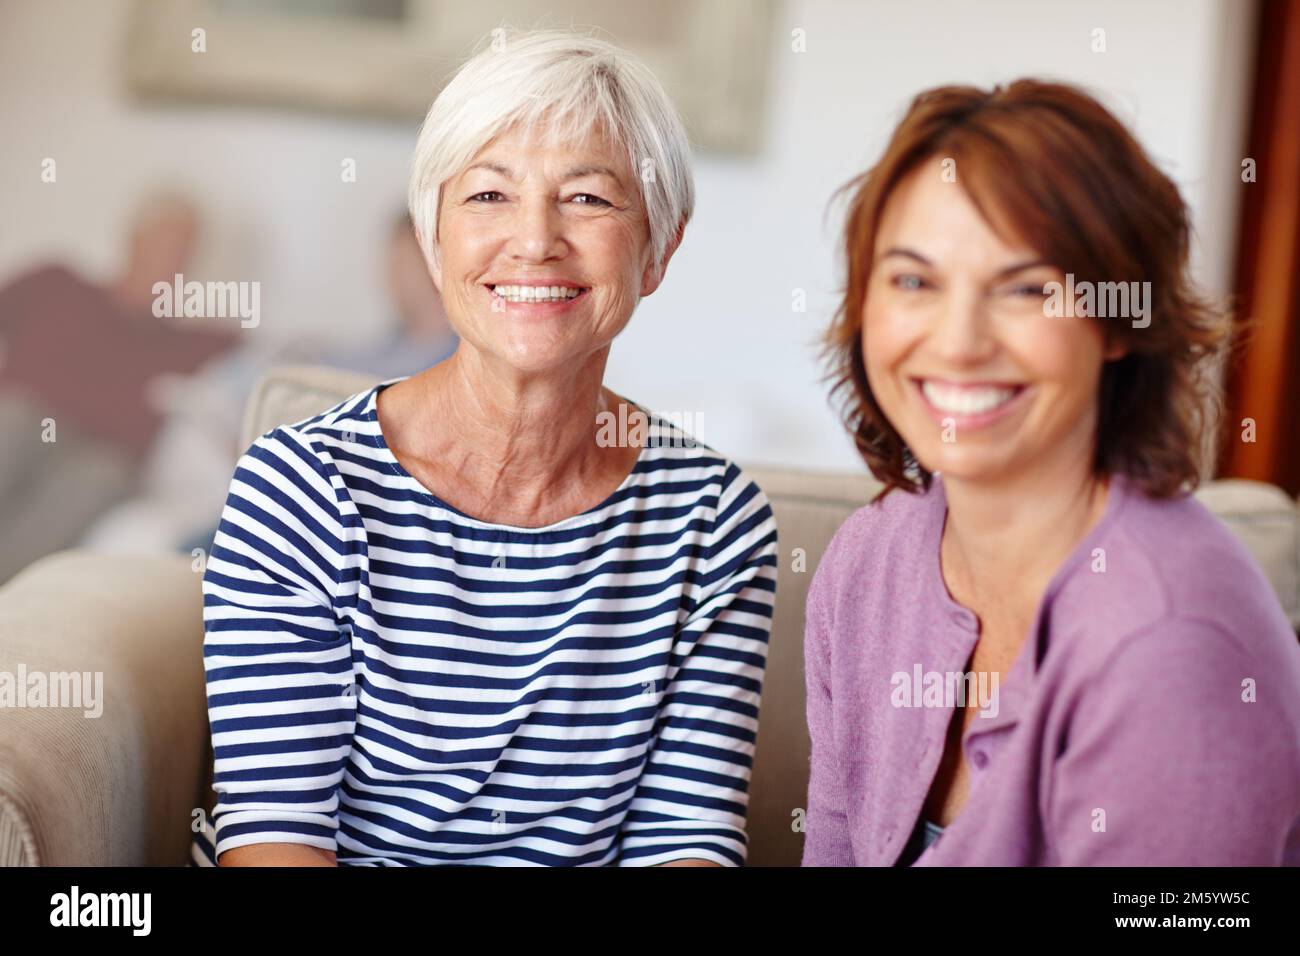 Cherishing every moment together. Portrait of a mother and daughter at home. Stock Photo